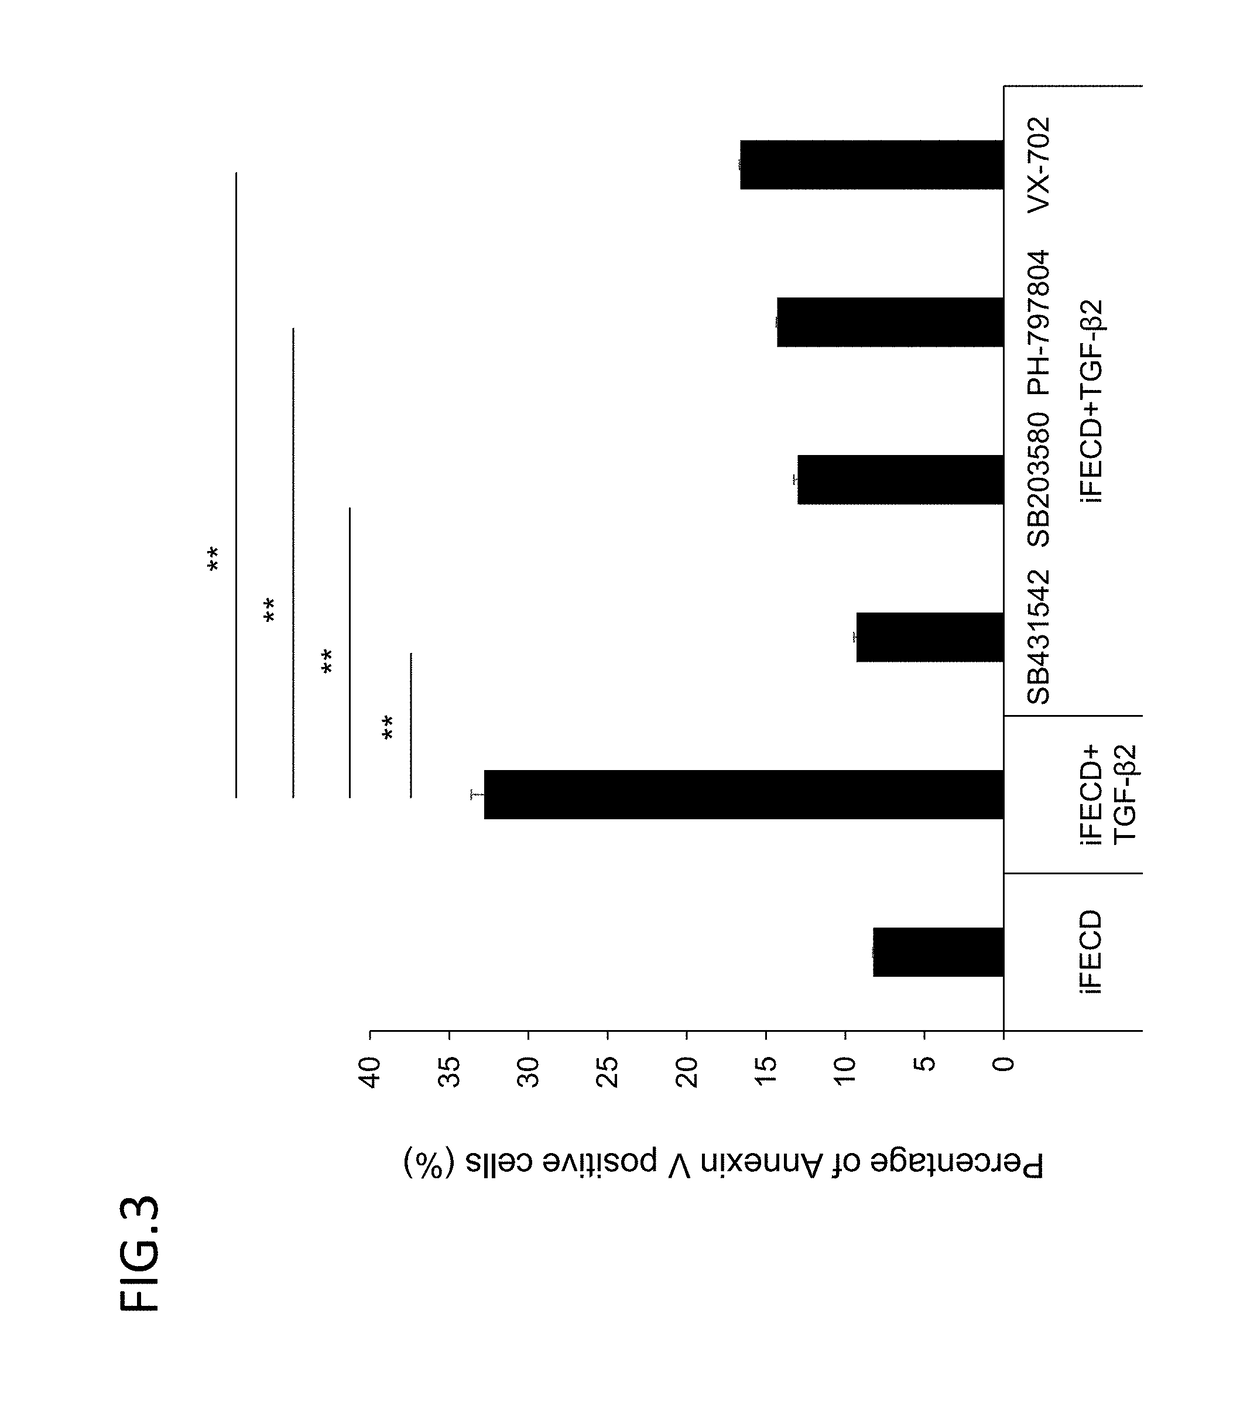 Drug for treating or preventing disorder caused by tgf-b signals, and application thereof